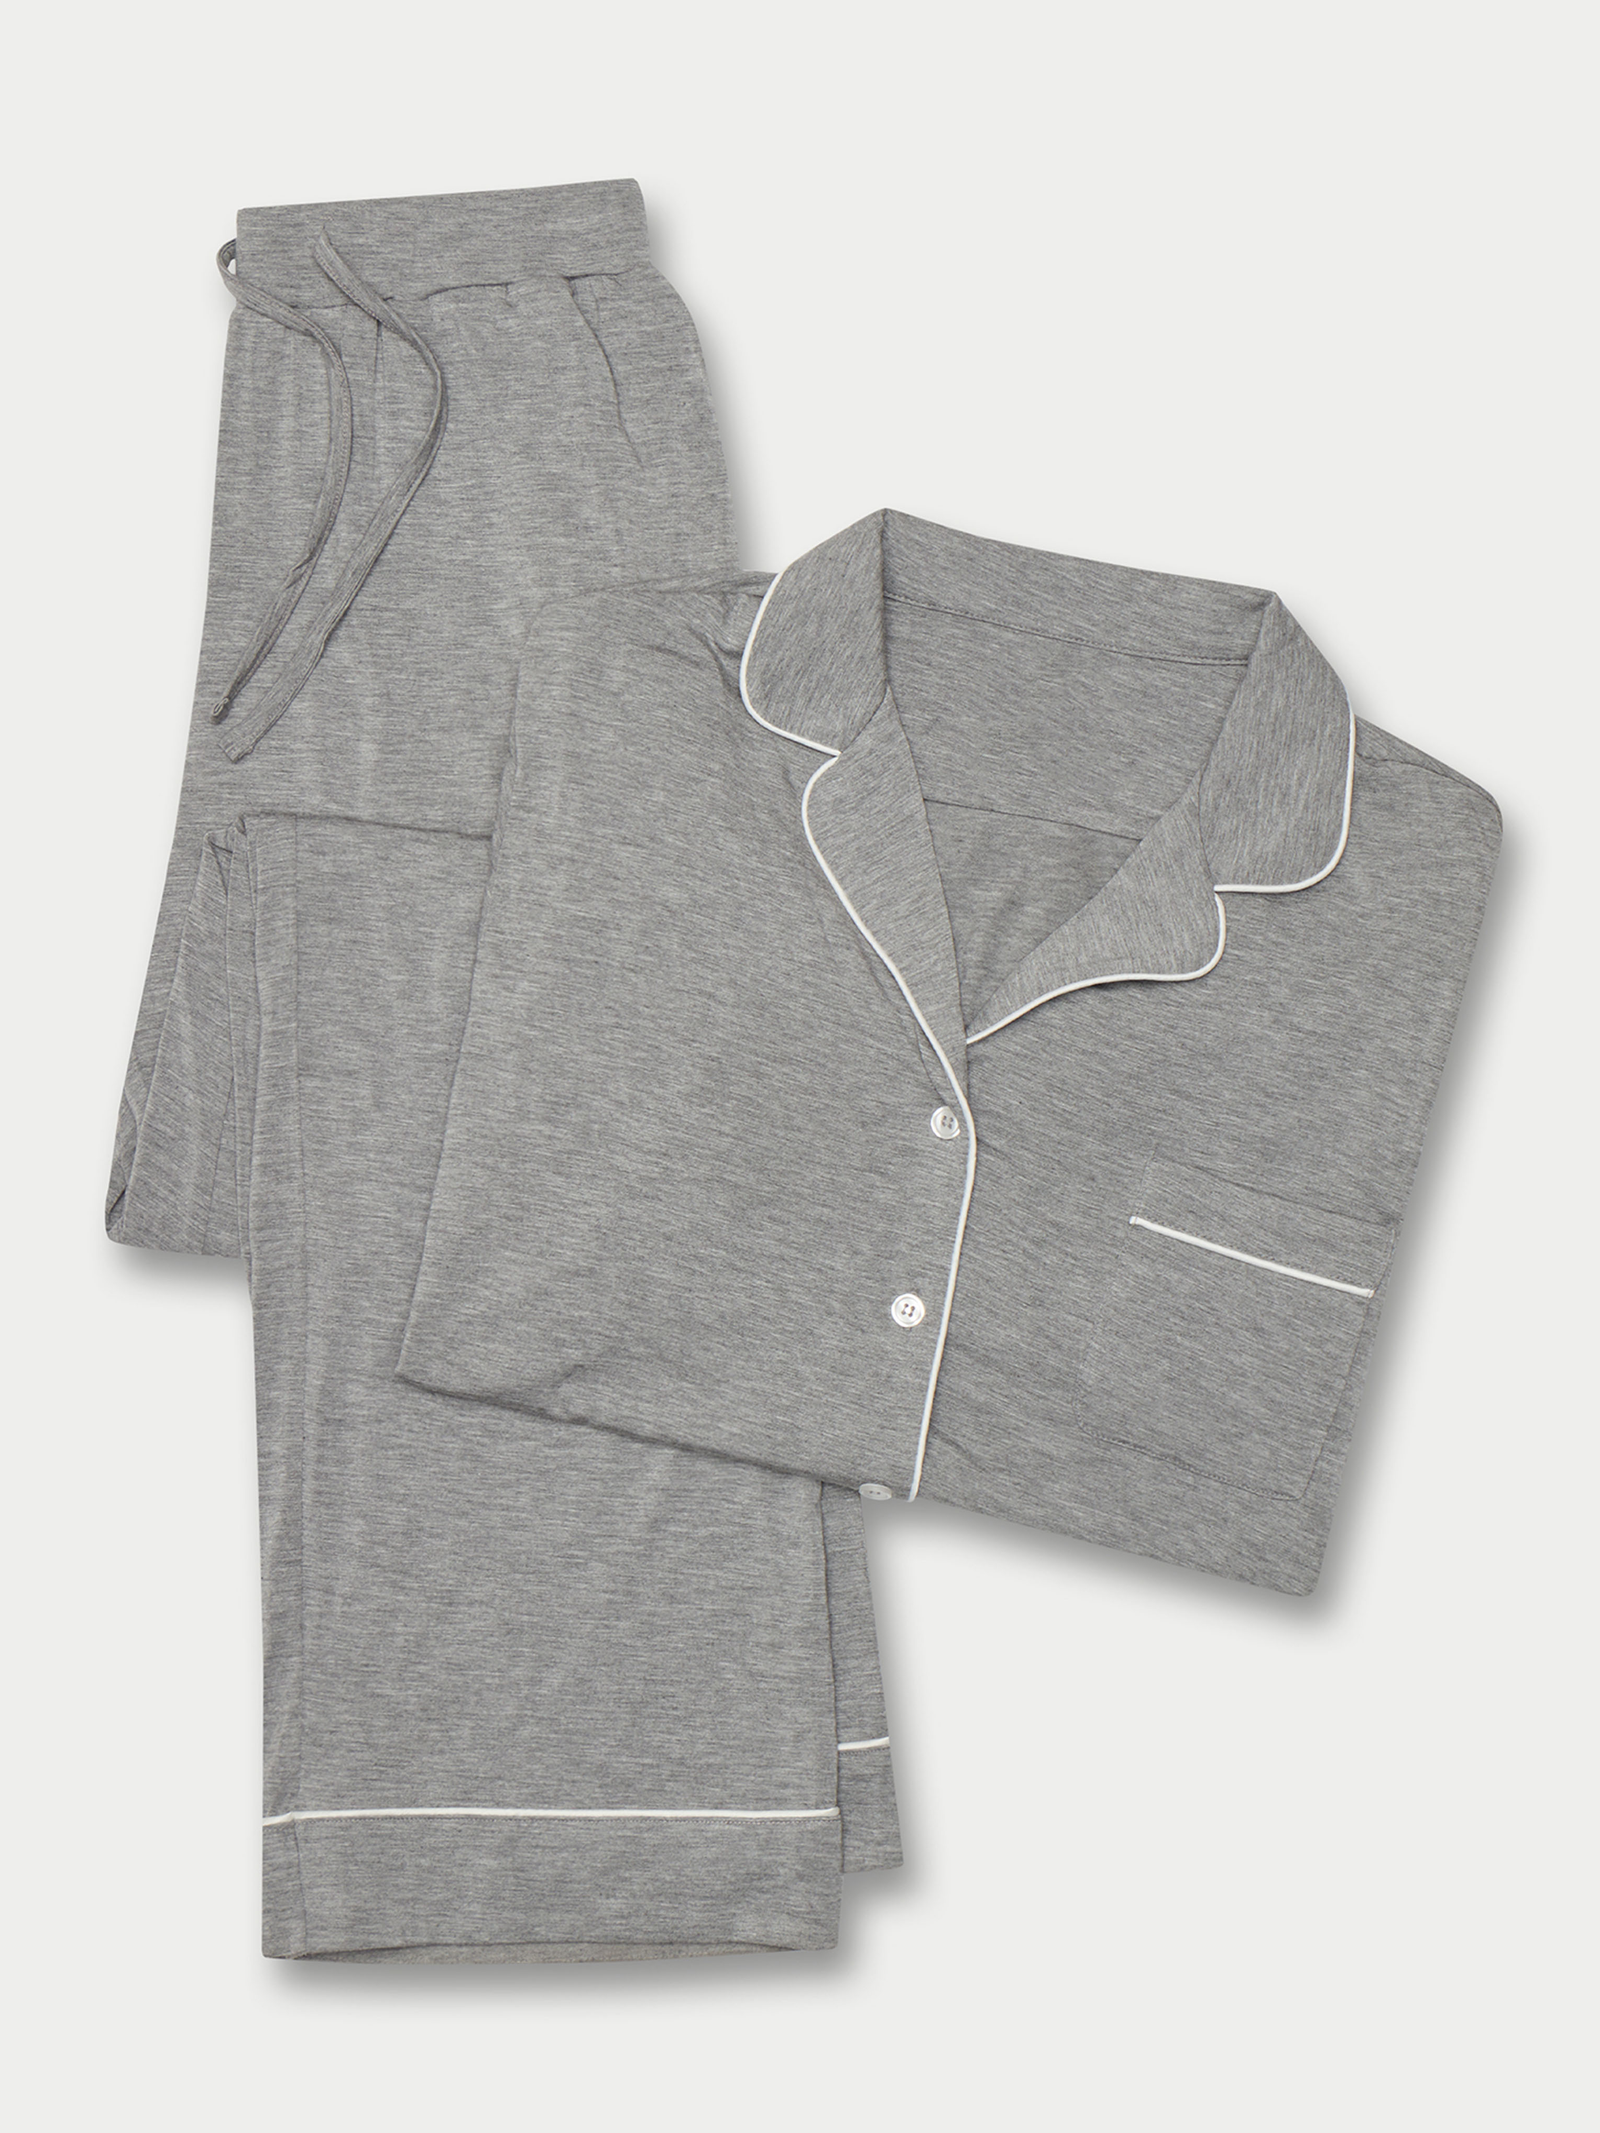 Light Grey Long Sleeve Pajama Set. The photo was taken close up, showing off the print of the pajamas. 